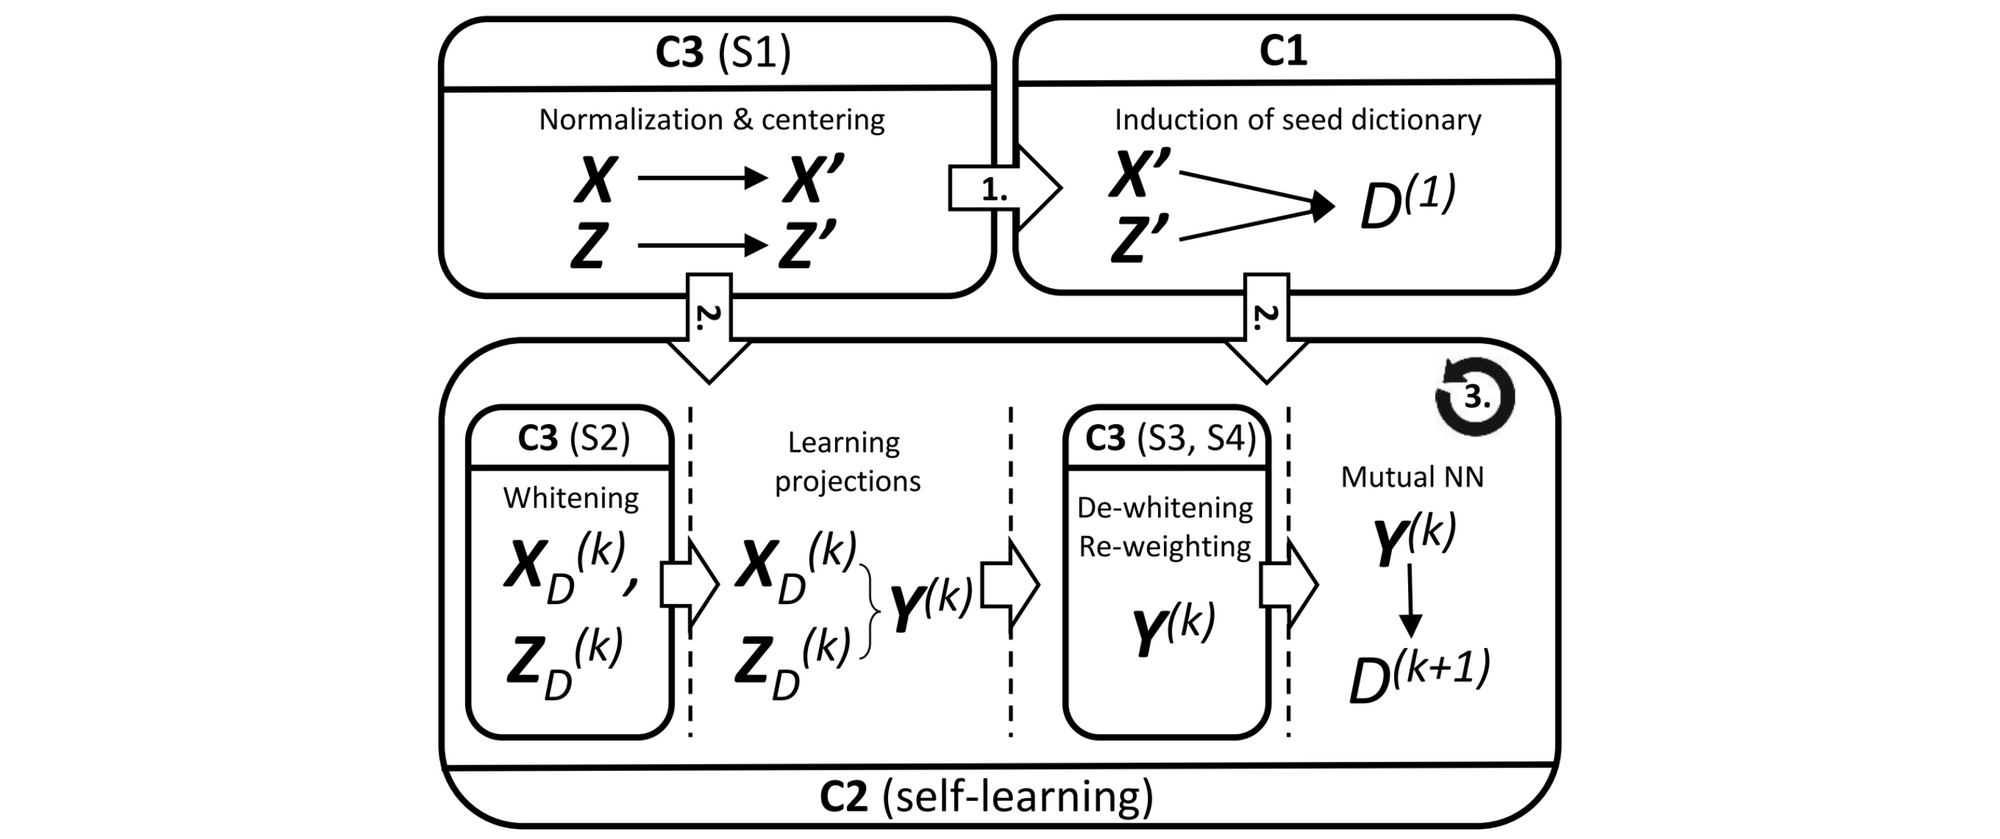 Unsupervised Cross-lingual Representation Learning